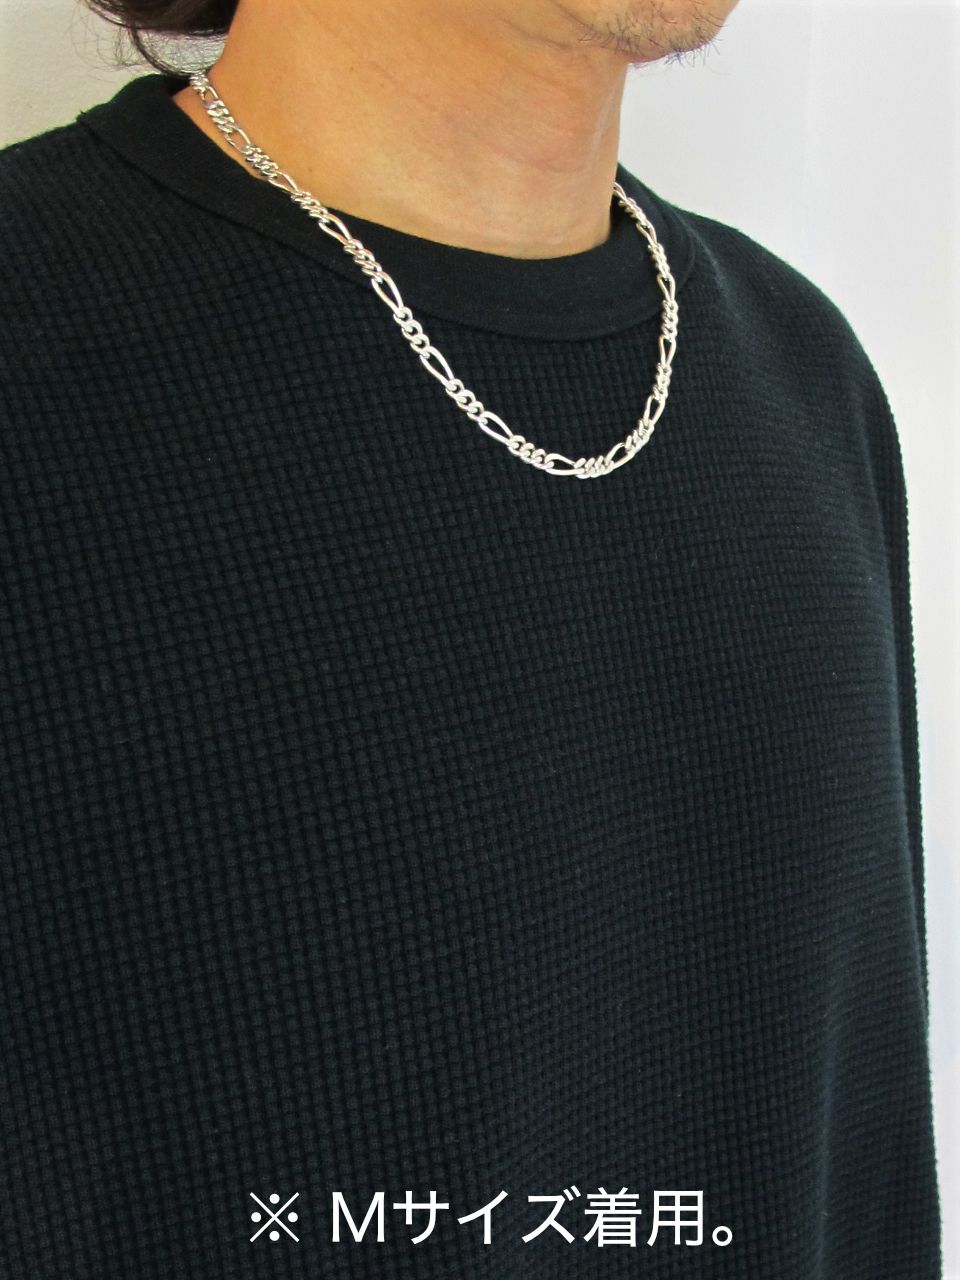 ANTIDOTE BUYERS CLUB - FIGARO WIDE CHAIN (SILVER) / フィガロワイド